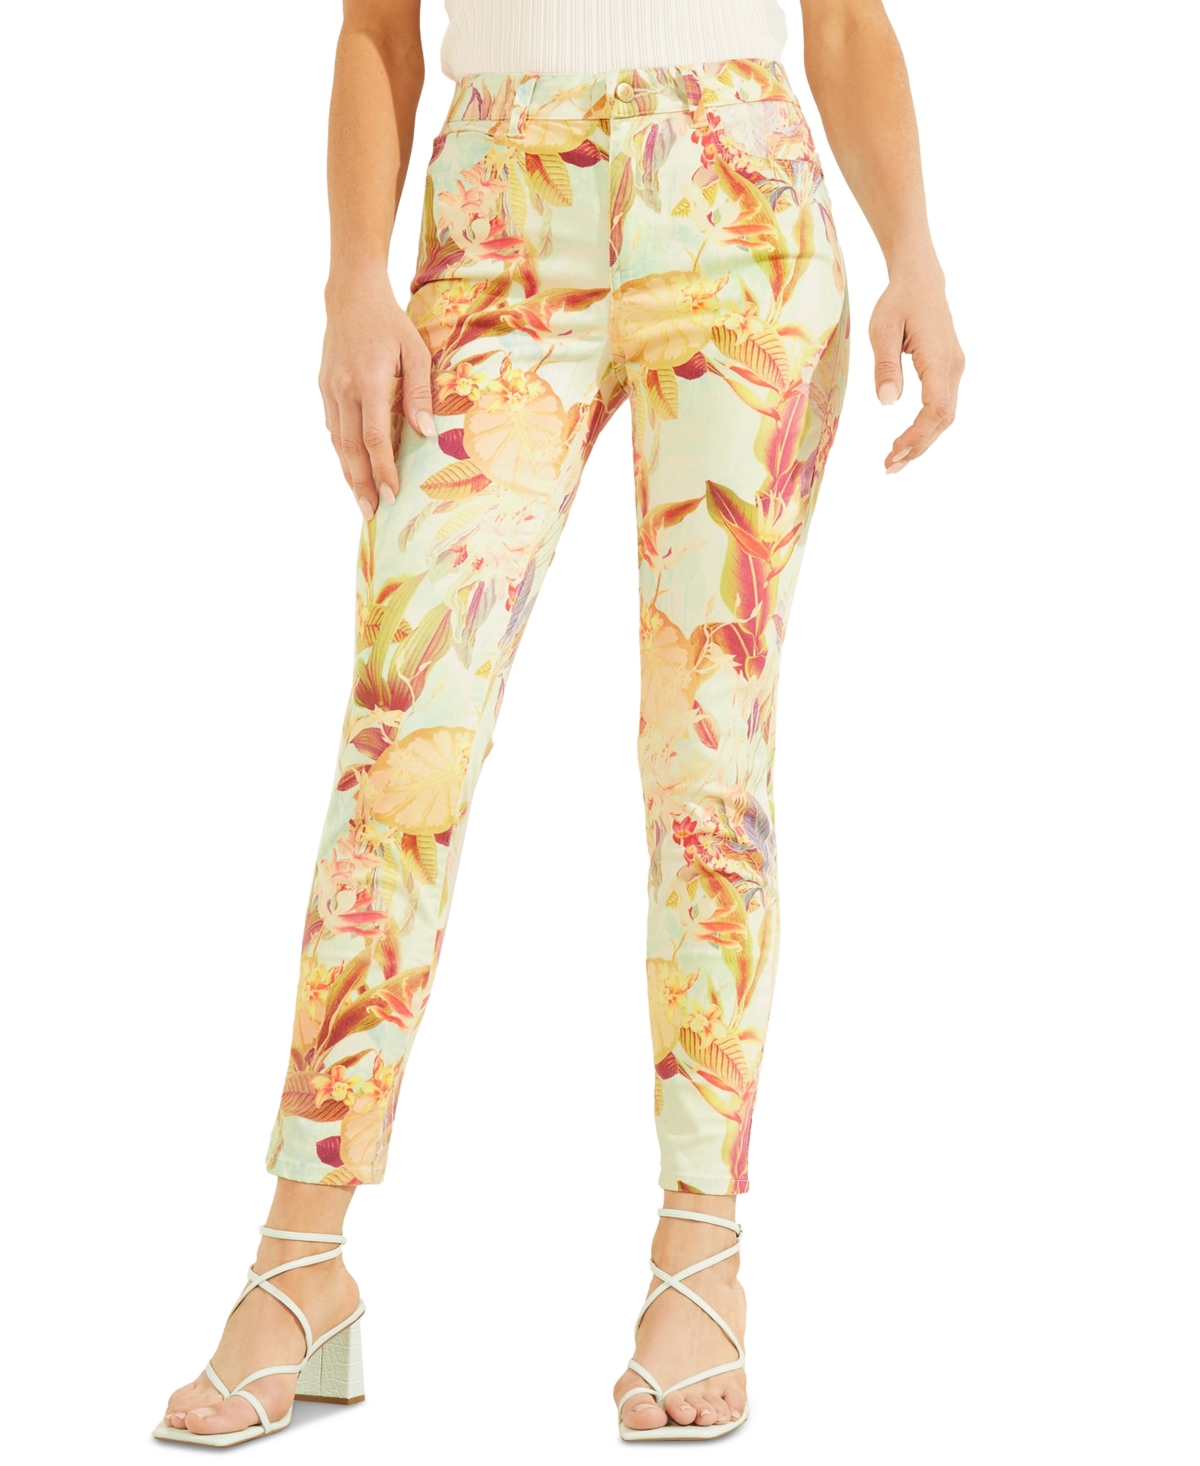  Guess Women's 1981 Printed Skinny Jeans